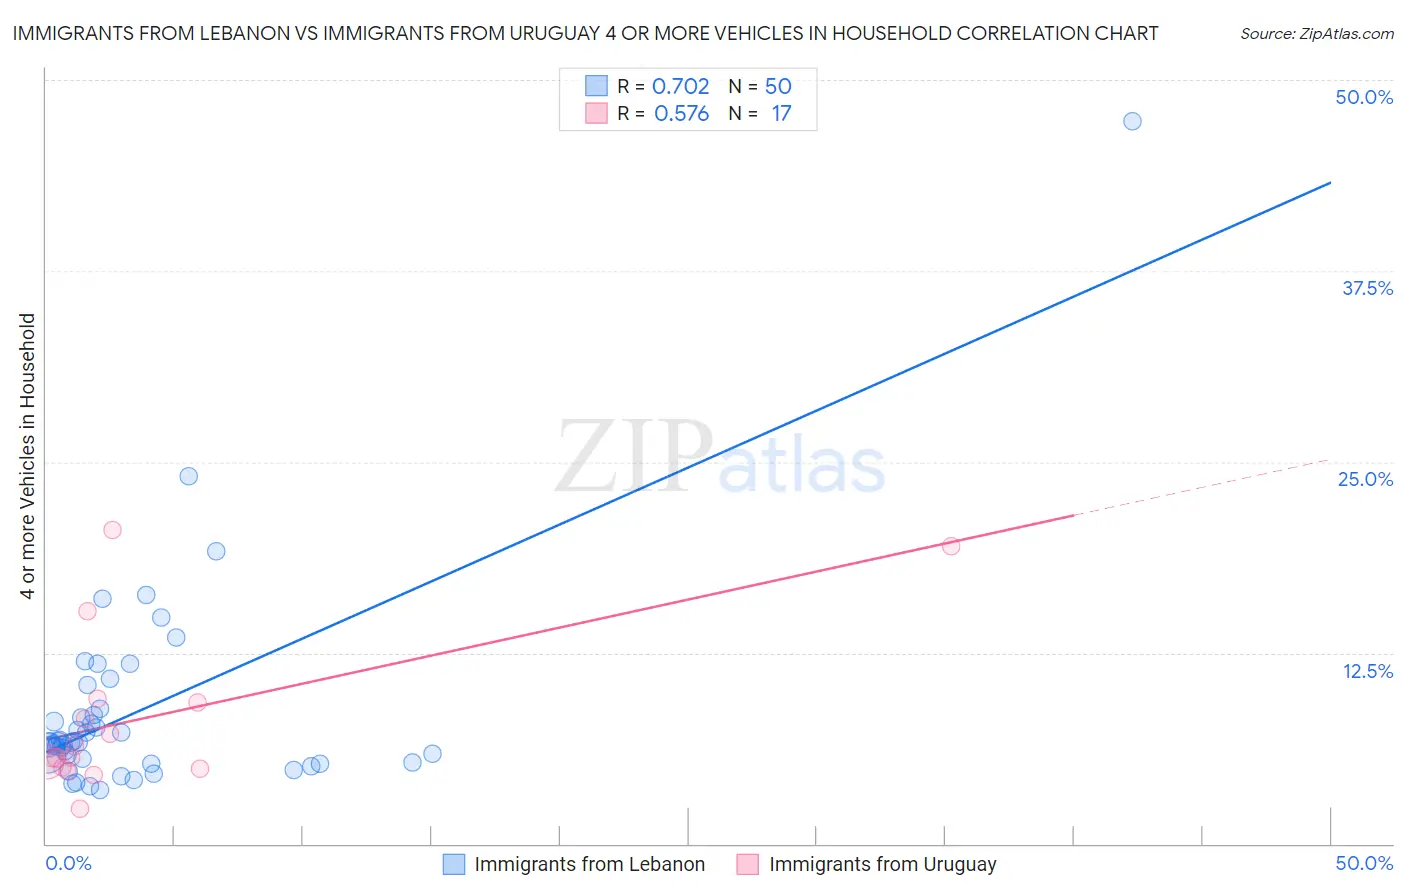 Immigrants from Lebanon vs Immigrants from Uruguay 4 or more Vehicles in Household